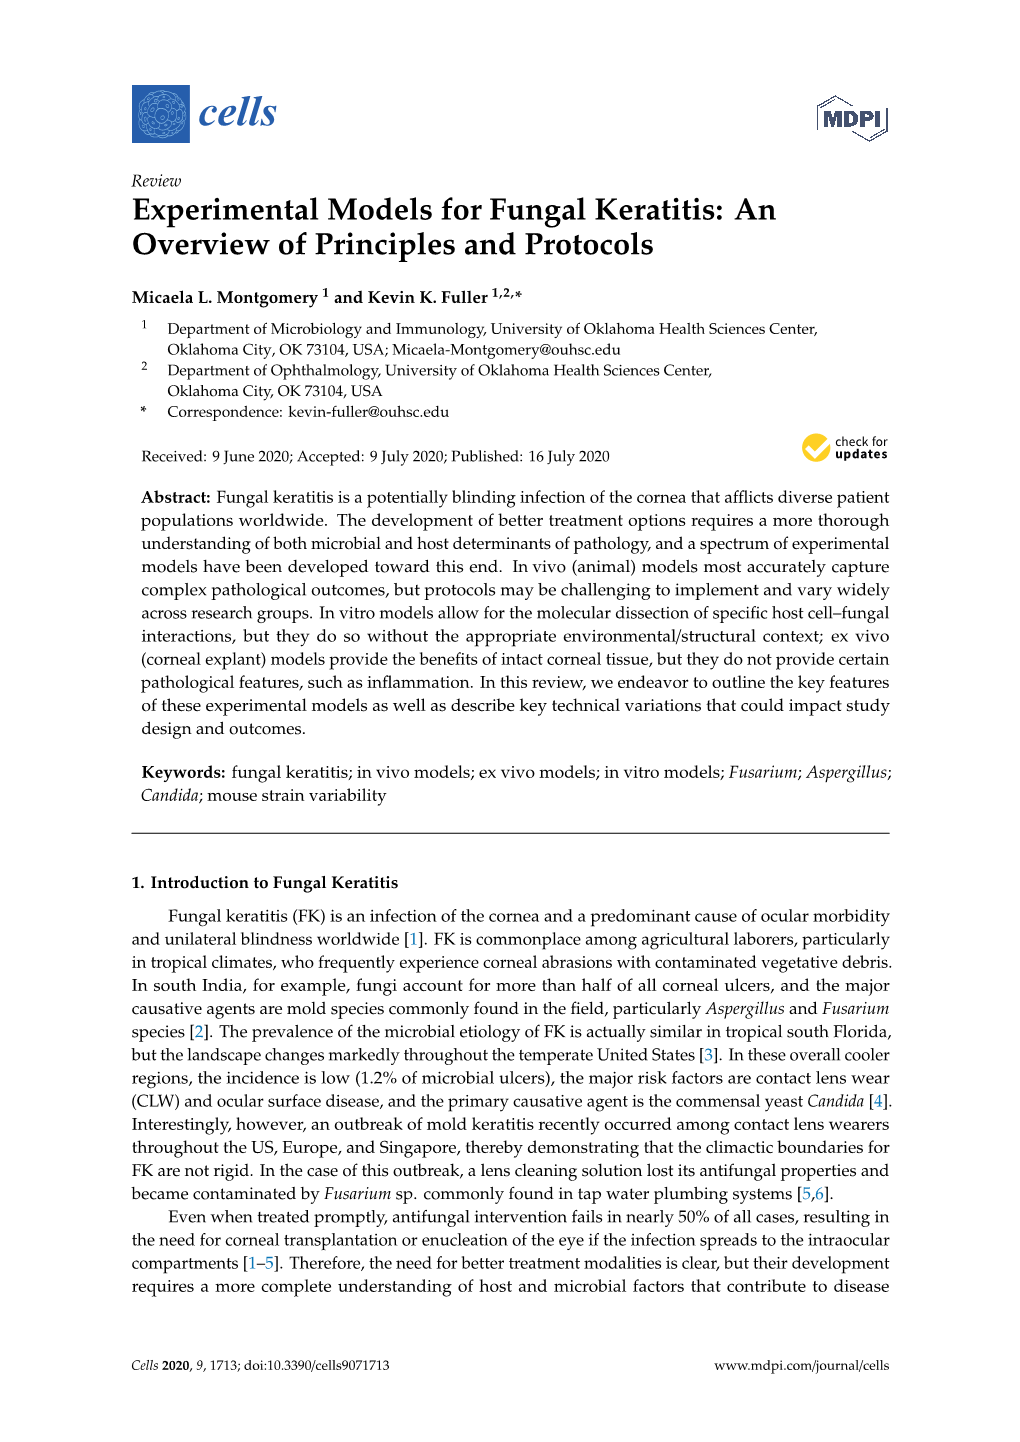 Experimental Models for Fungal Keratitis: an Overview of Principles and Protocols